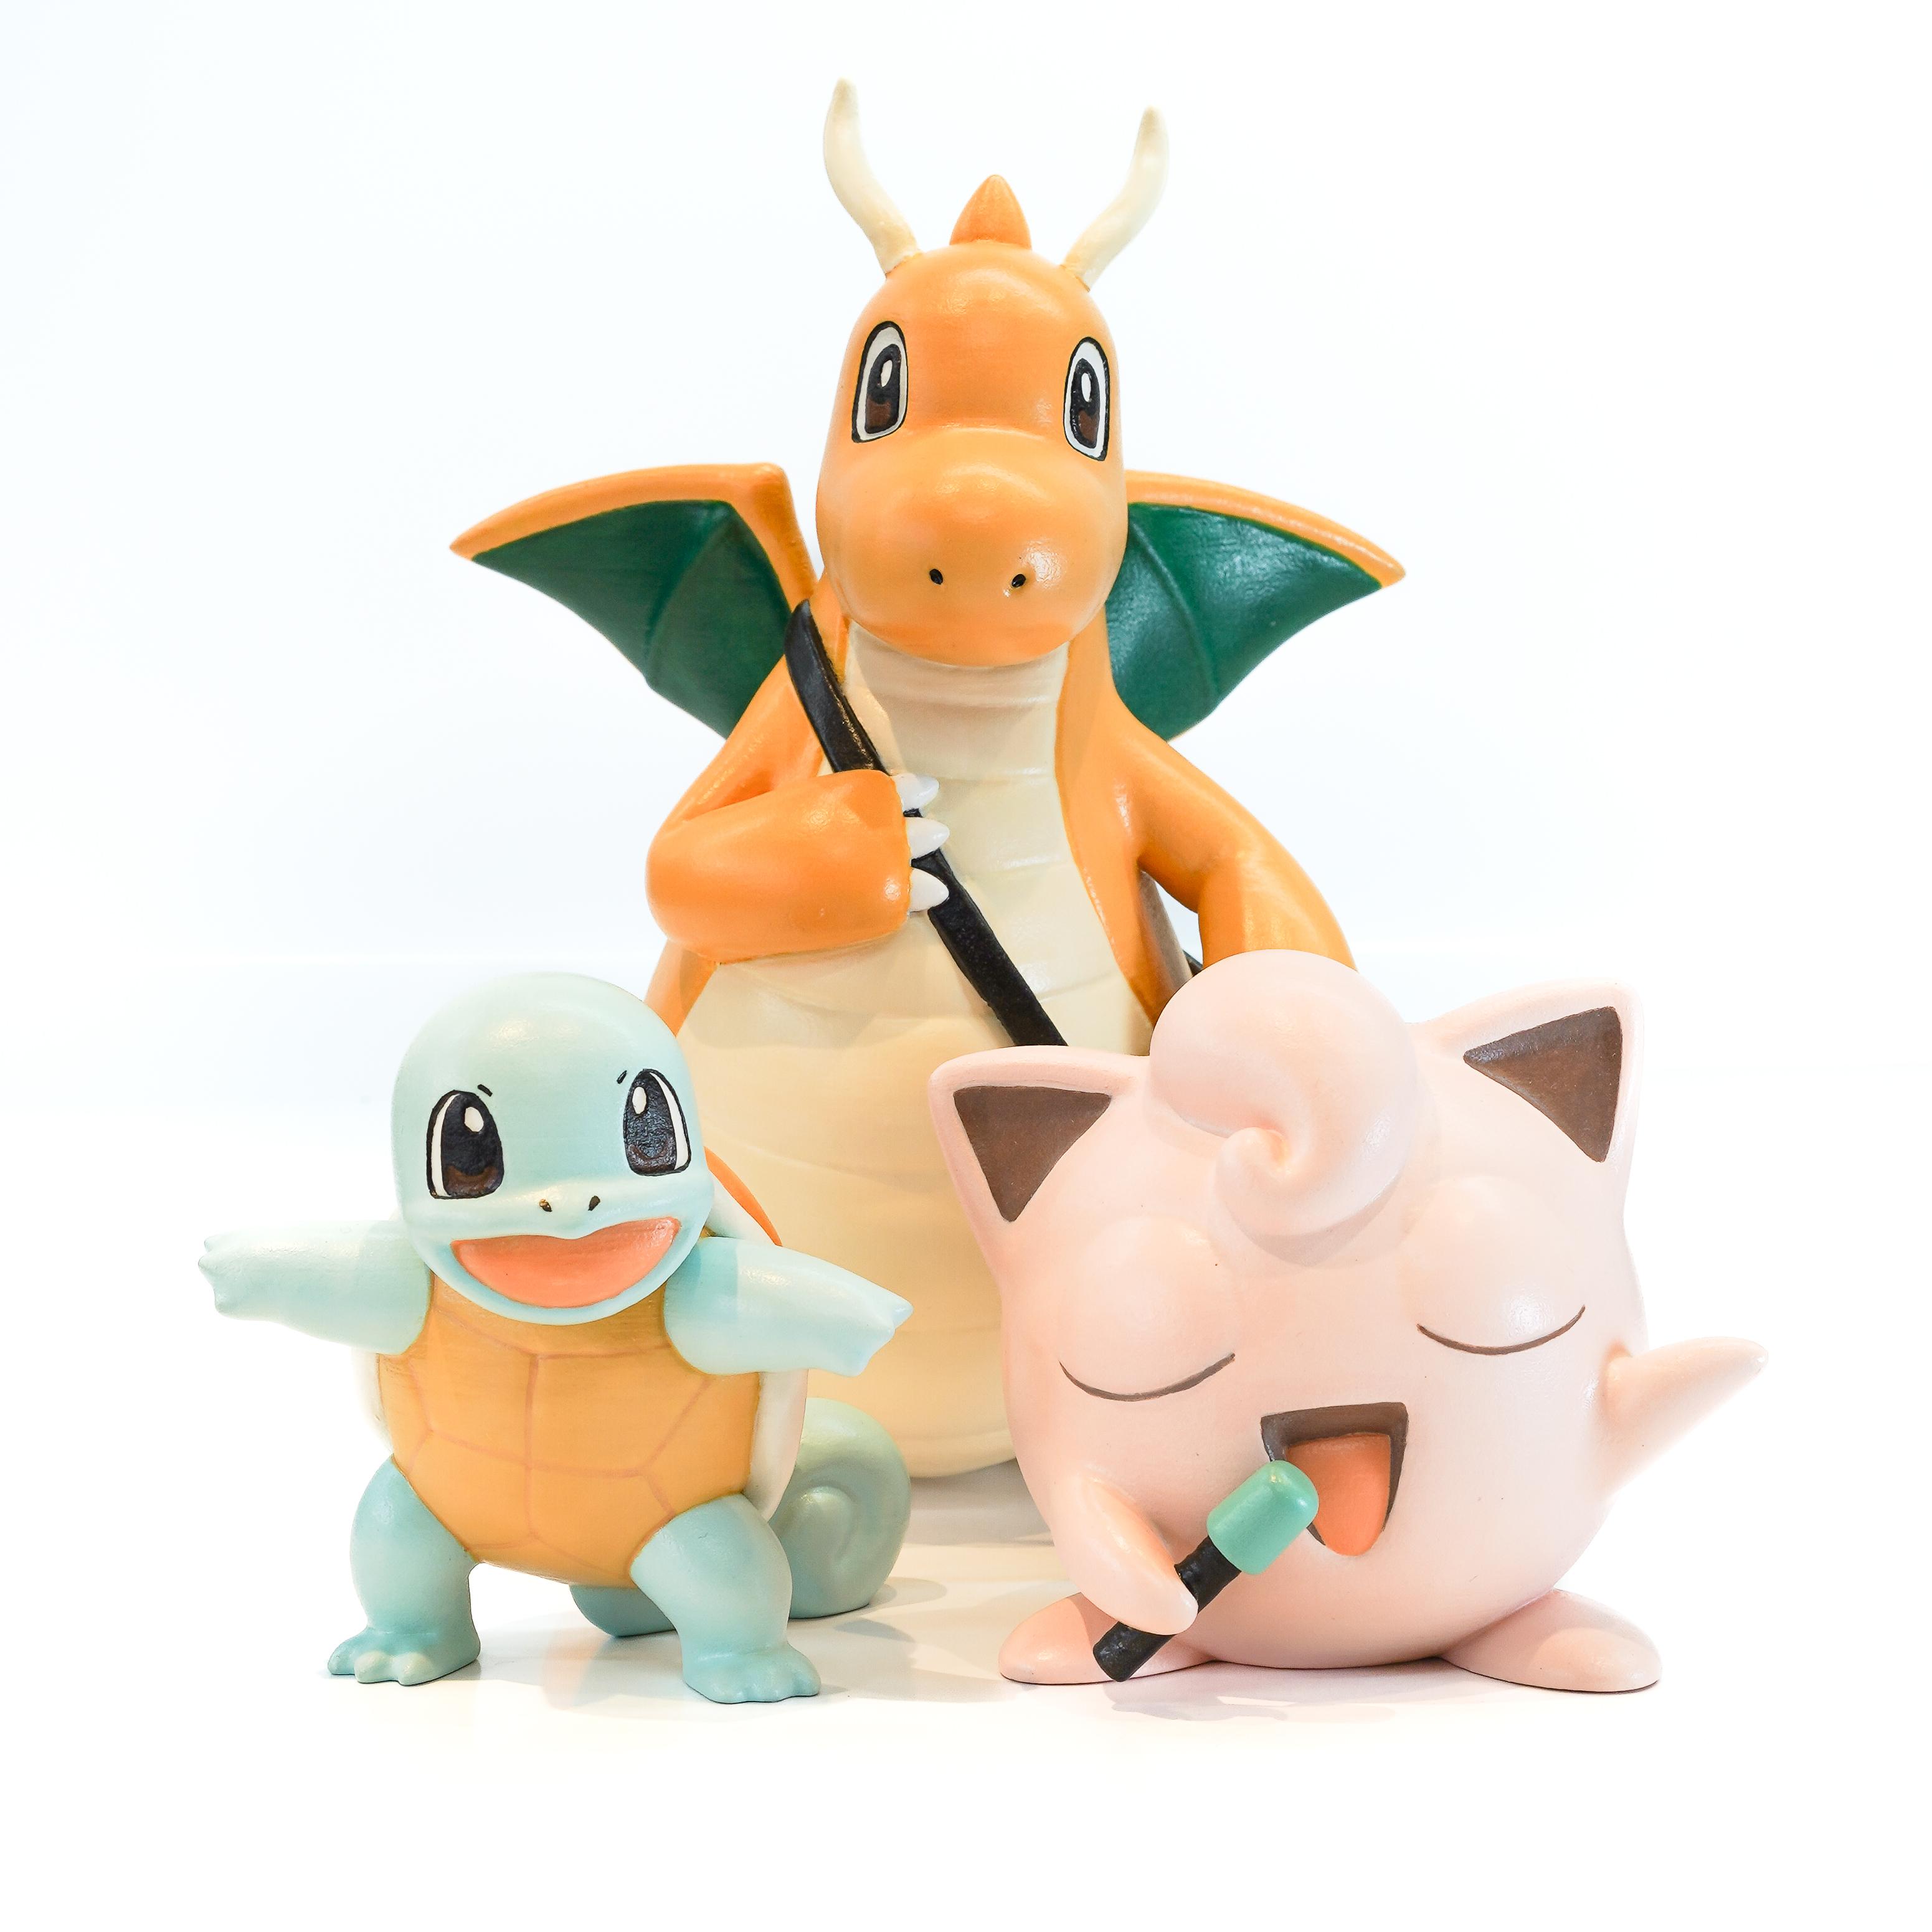 Dragonite(Pokémon) - 22cm Dragonite with Squirtle and Jigglypuff! - 3d model